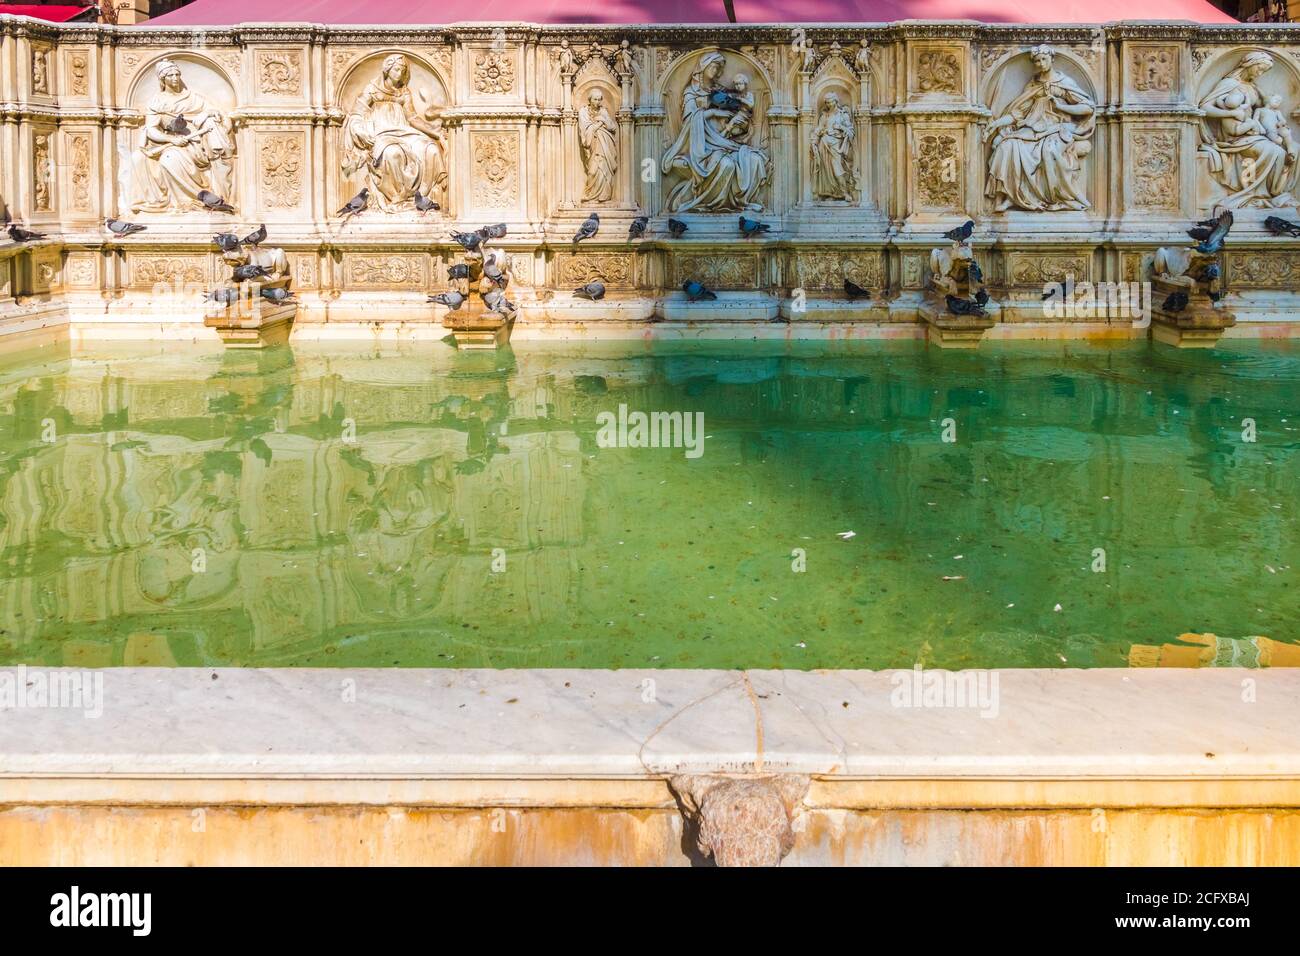 Close-up view of the monumental fountain Fonte Gaia in the Piazza del Campo of Siena, Italy. The fountain is adorned at the centre with a Madonna and... Stock Photo